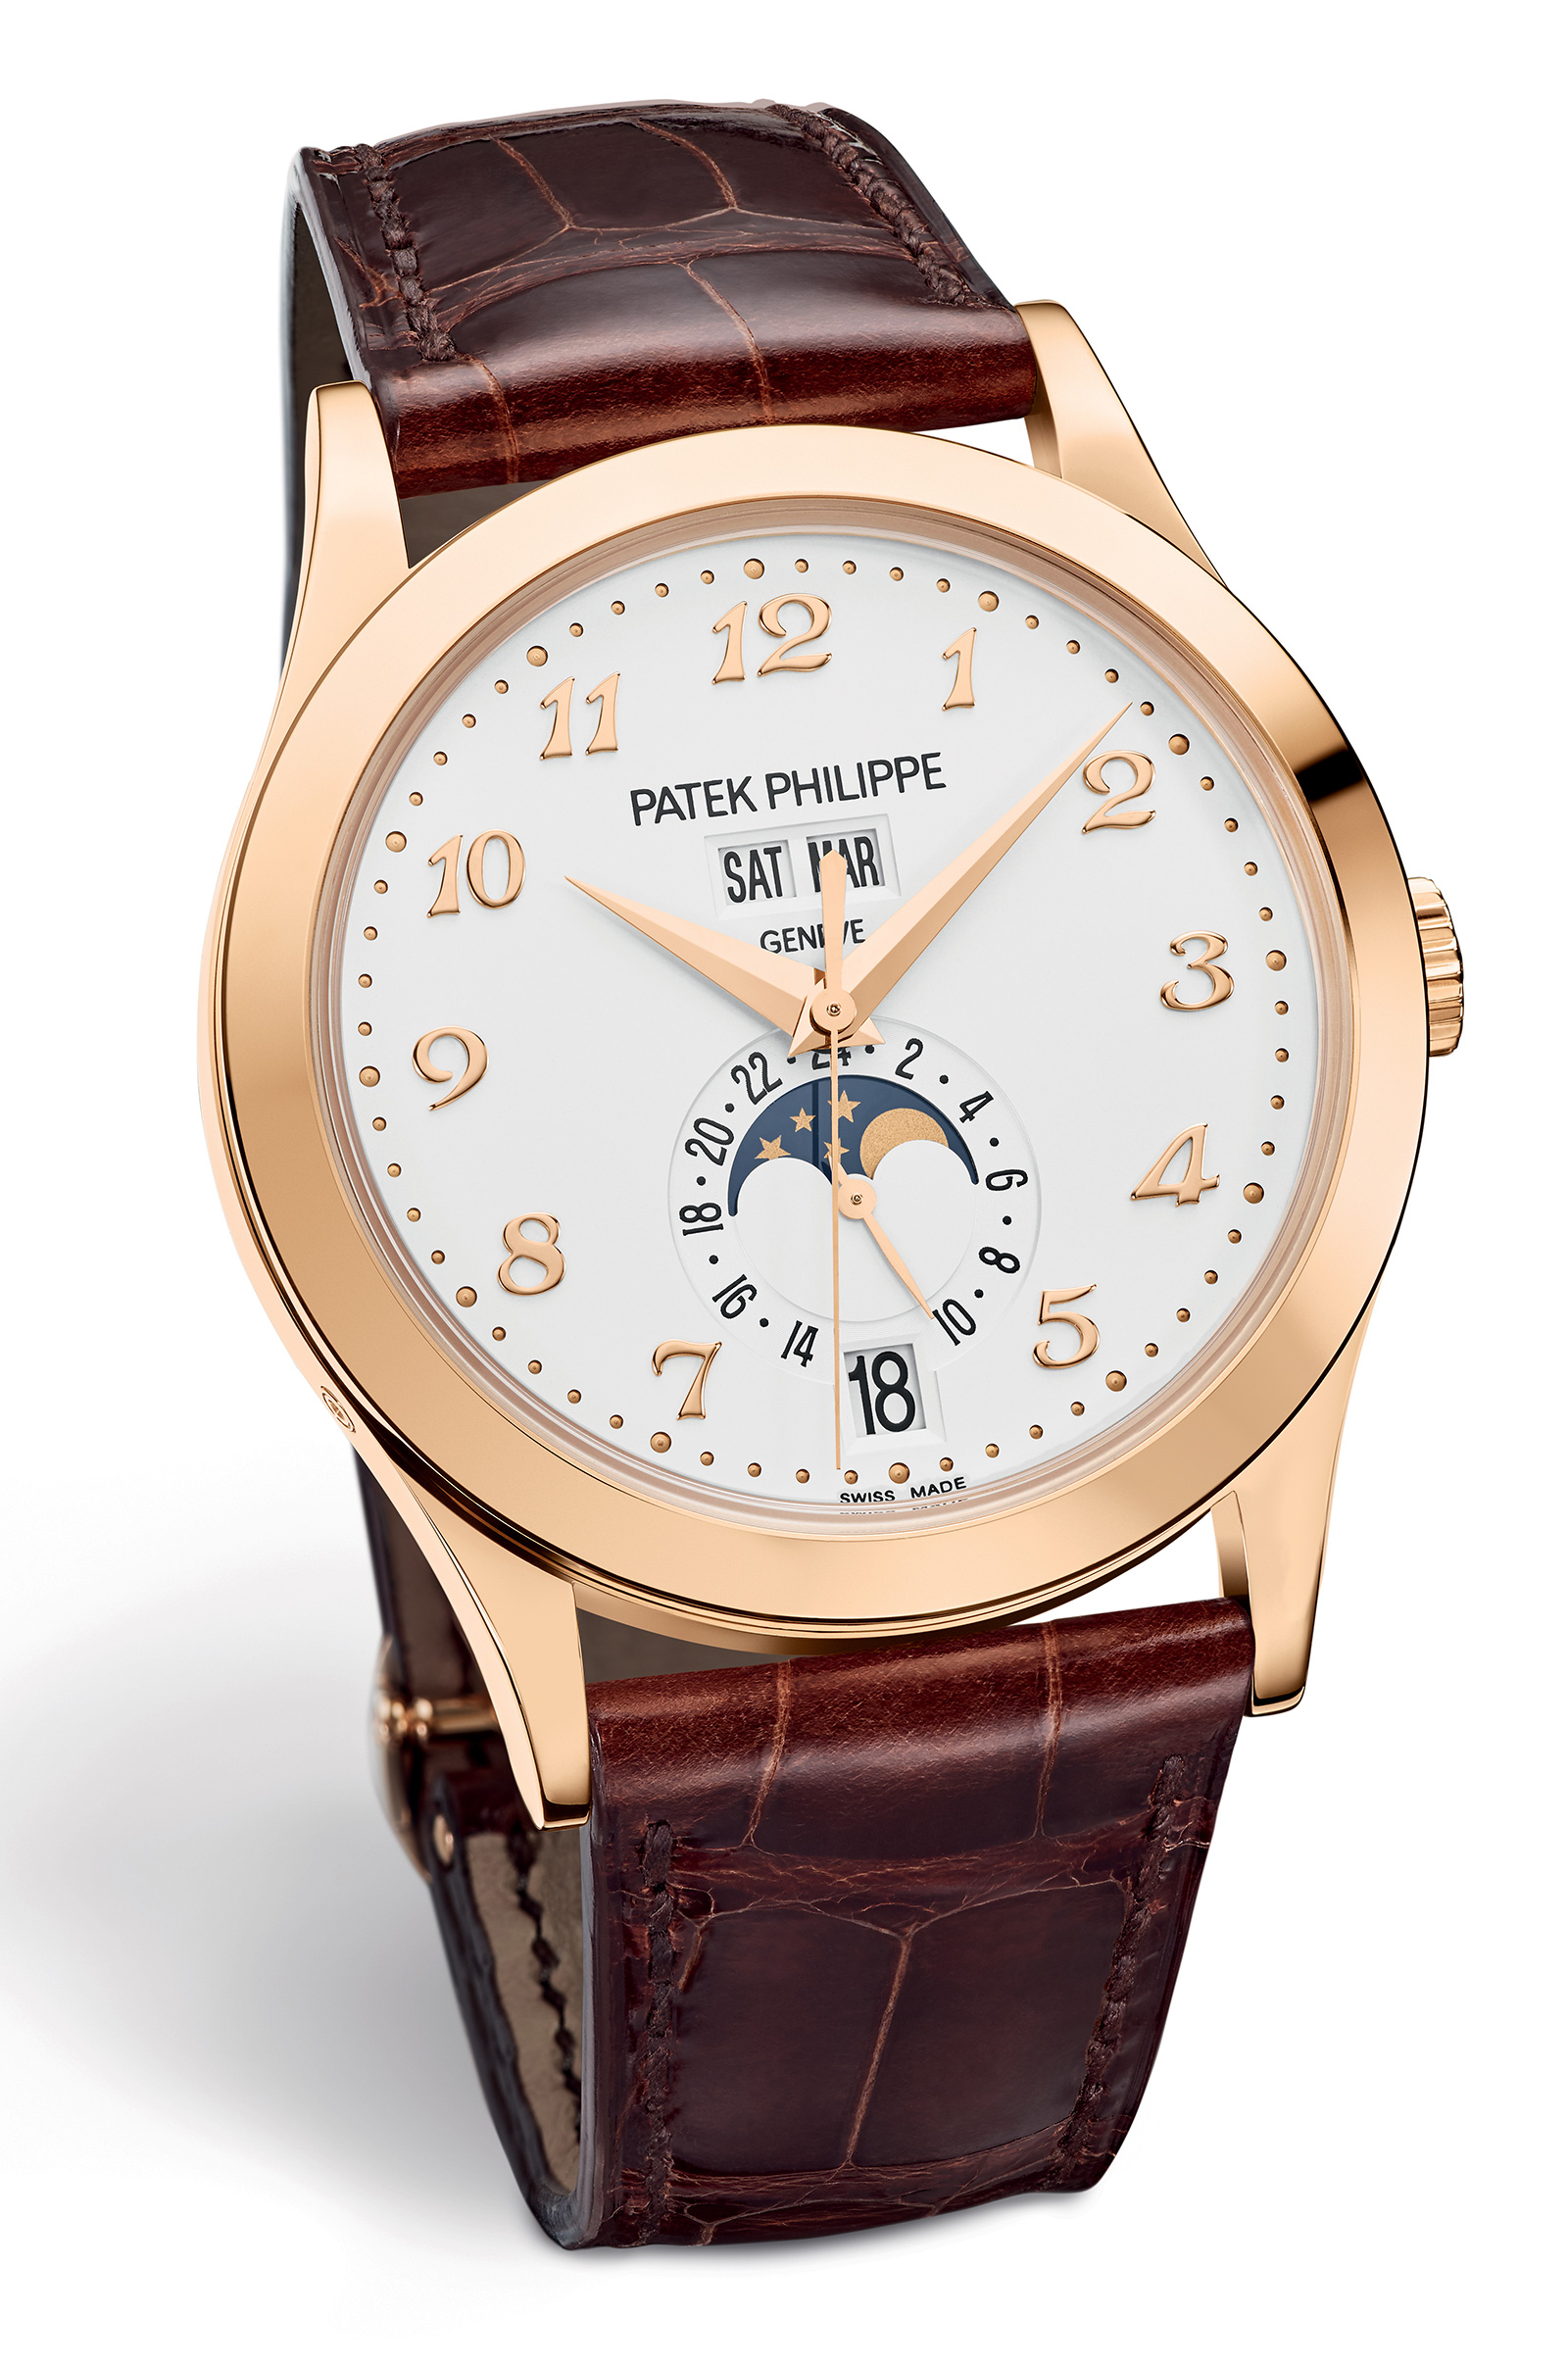 Patek Philippe Introduces the Annual Calendar Ref. 5396 with Breguet